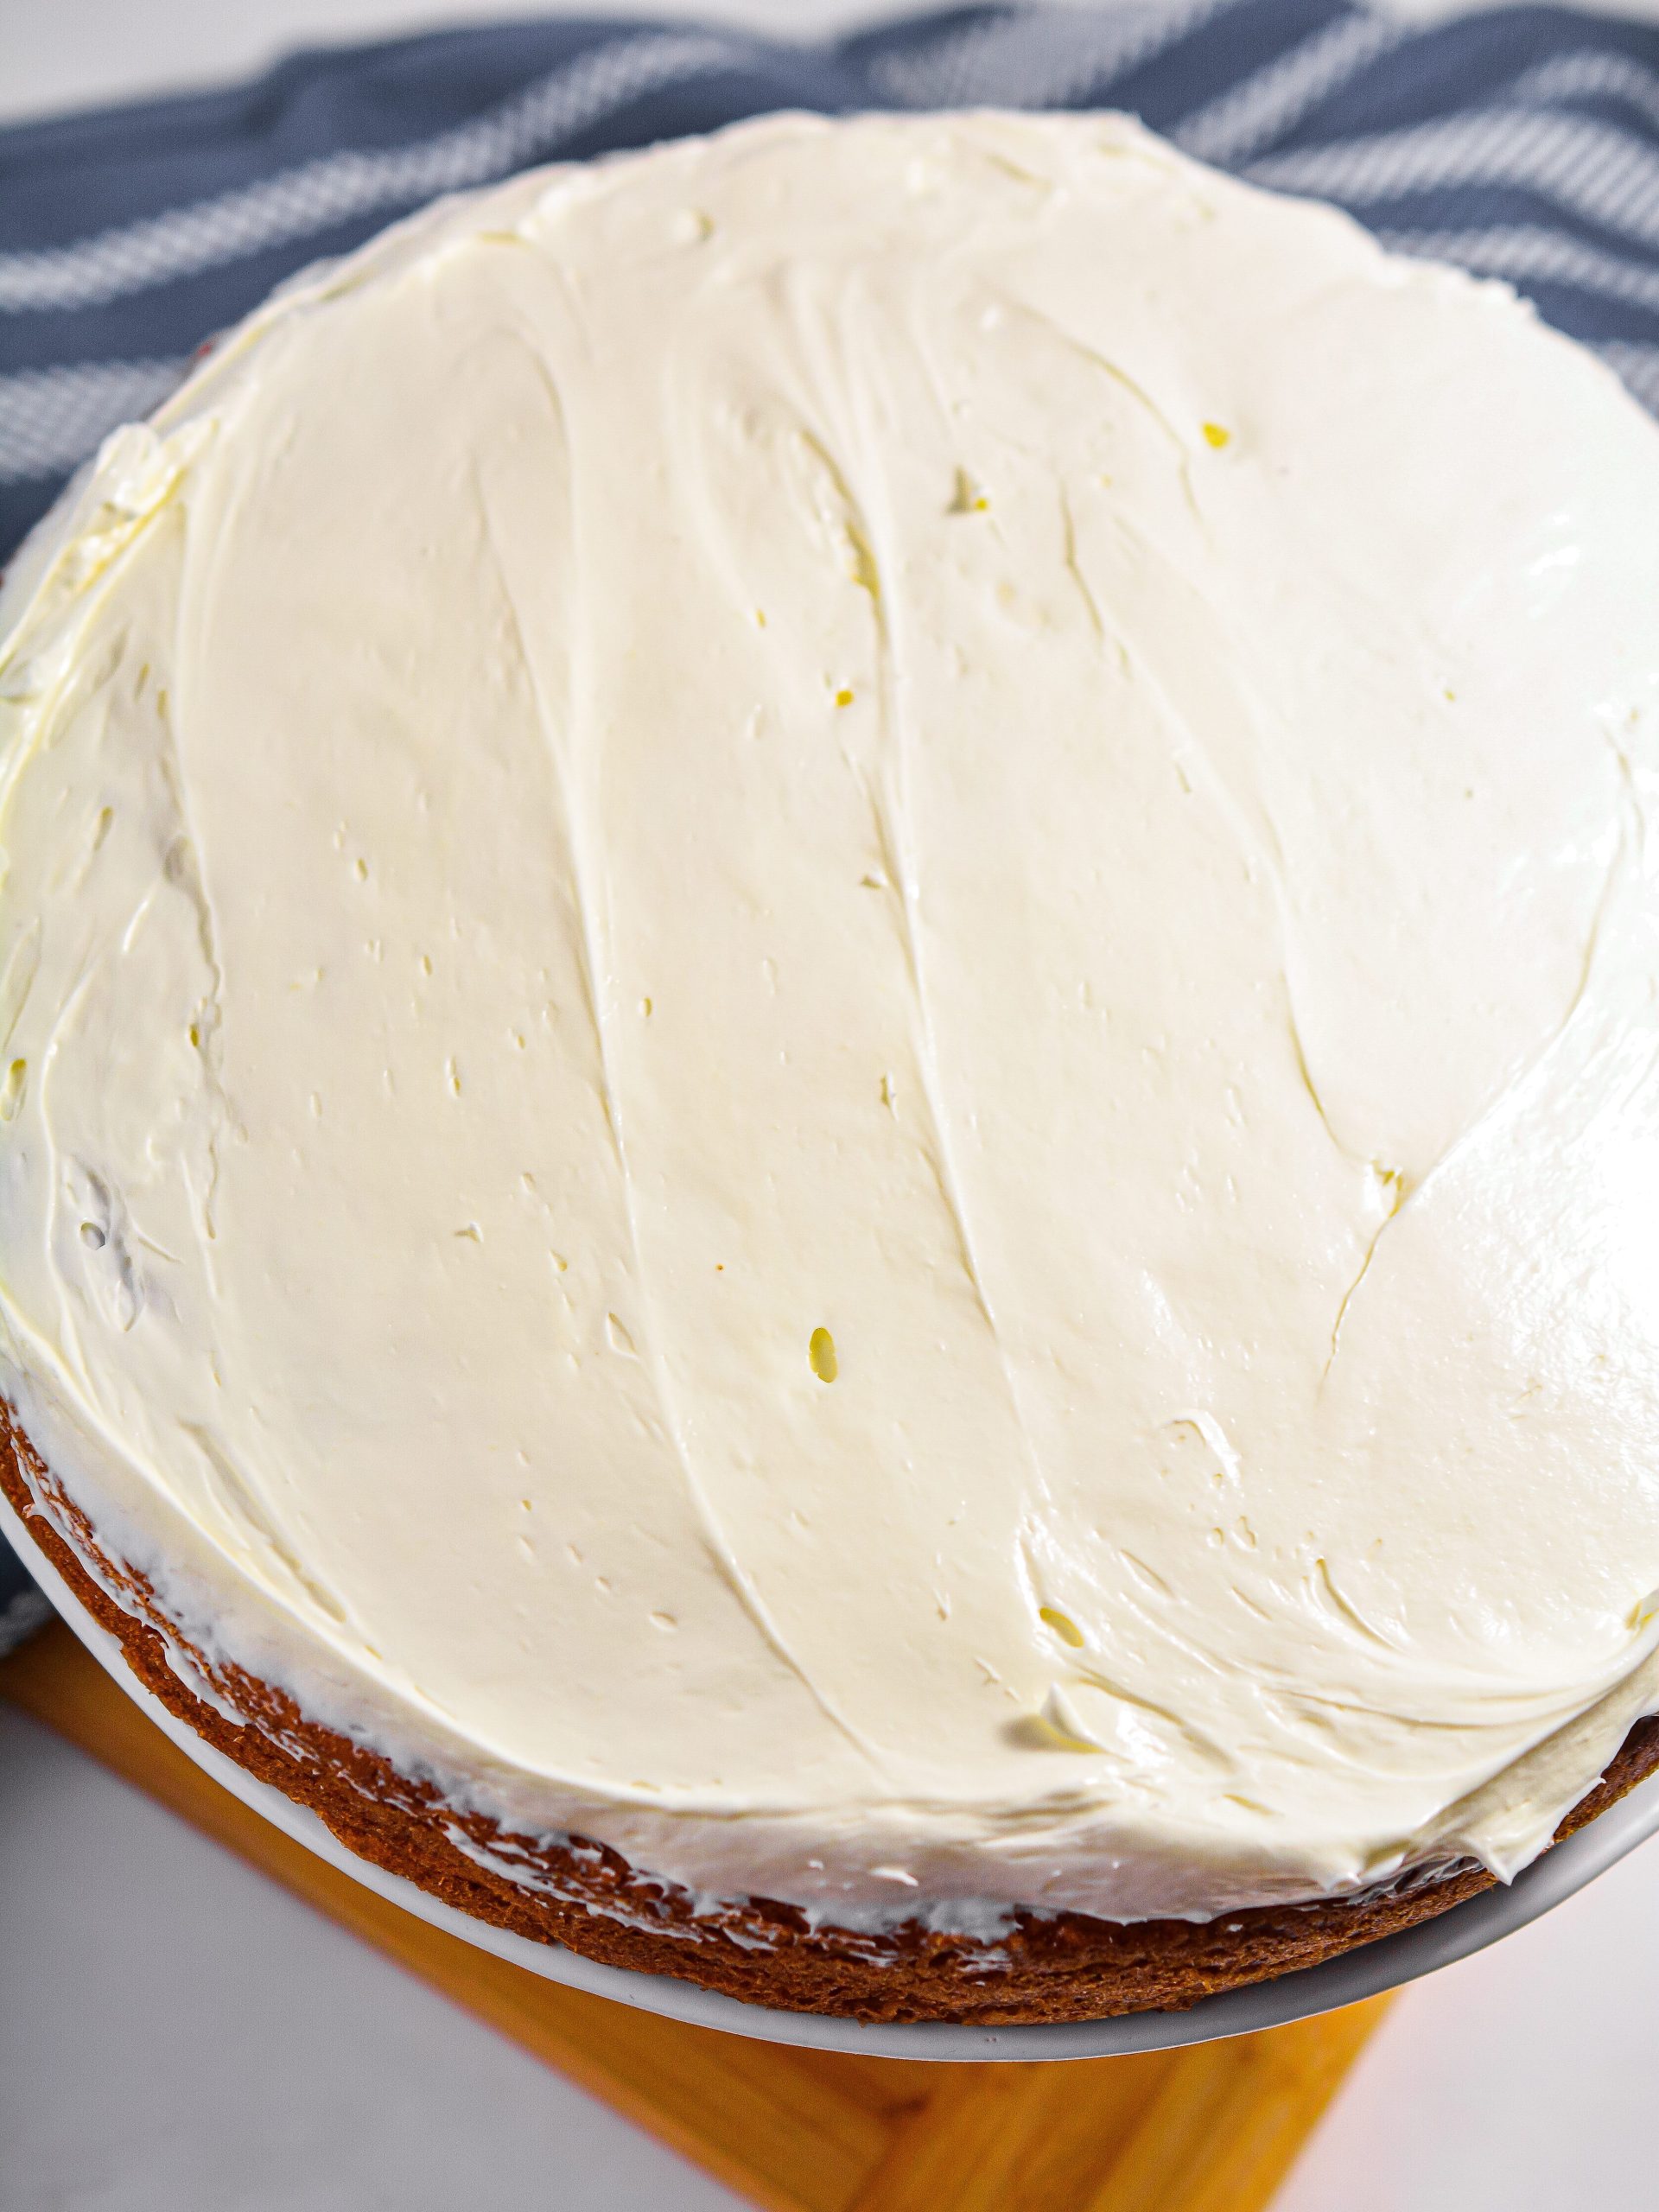 Place a layer of cake onto a tray or serving dish, then top with a layer of frosting.